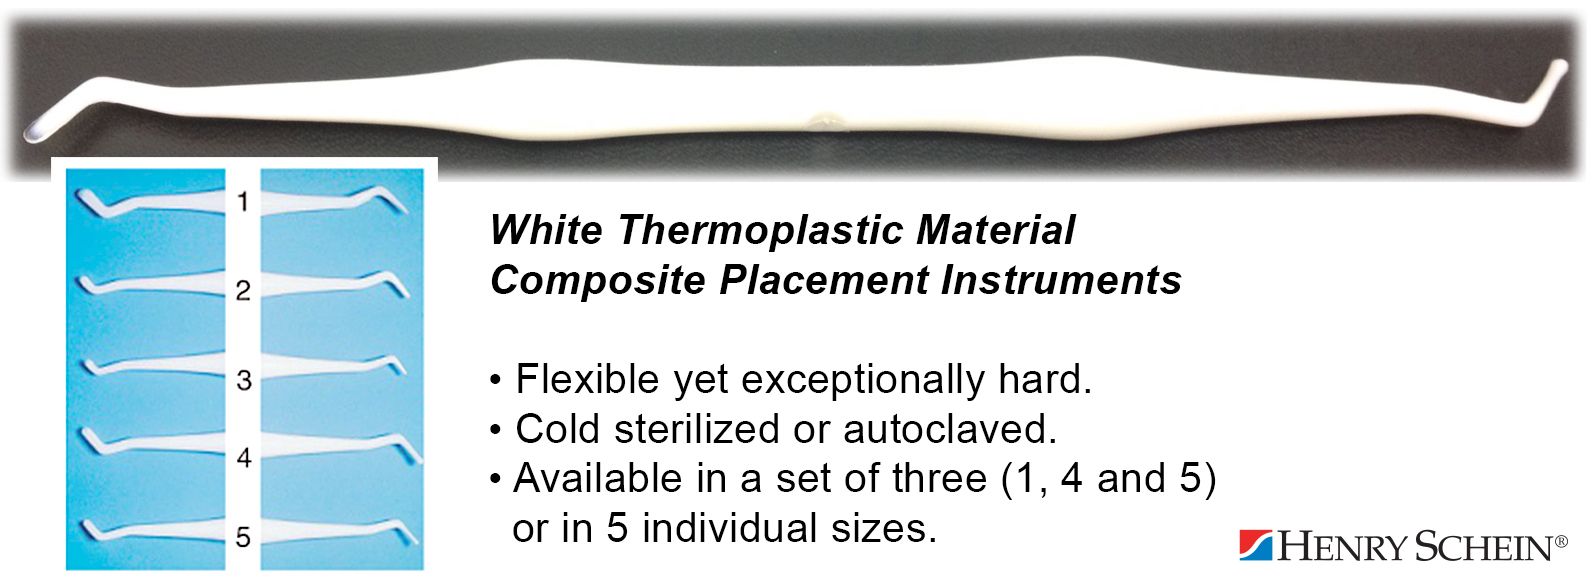 Composite Placement Instruments - White Thermoplastic